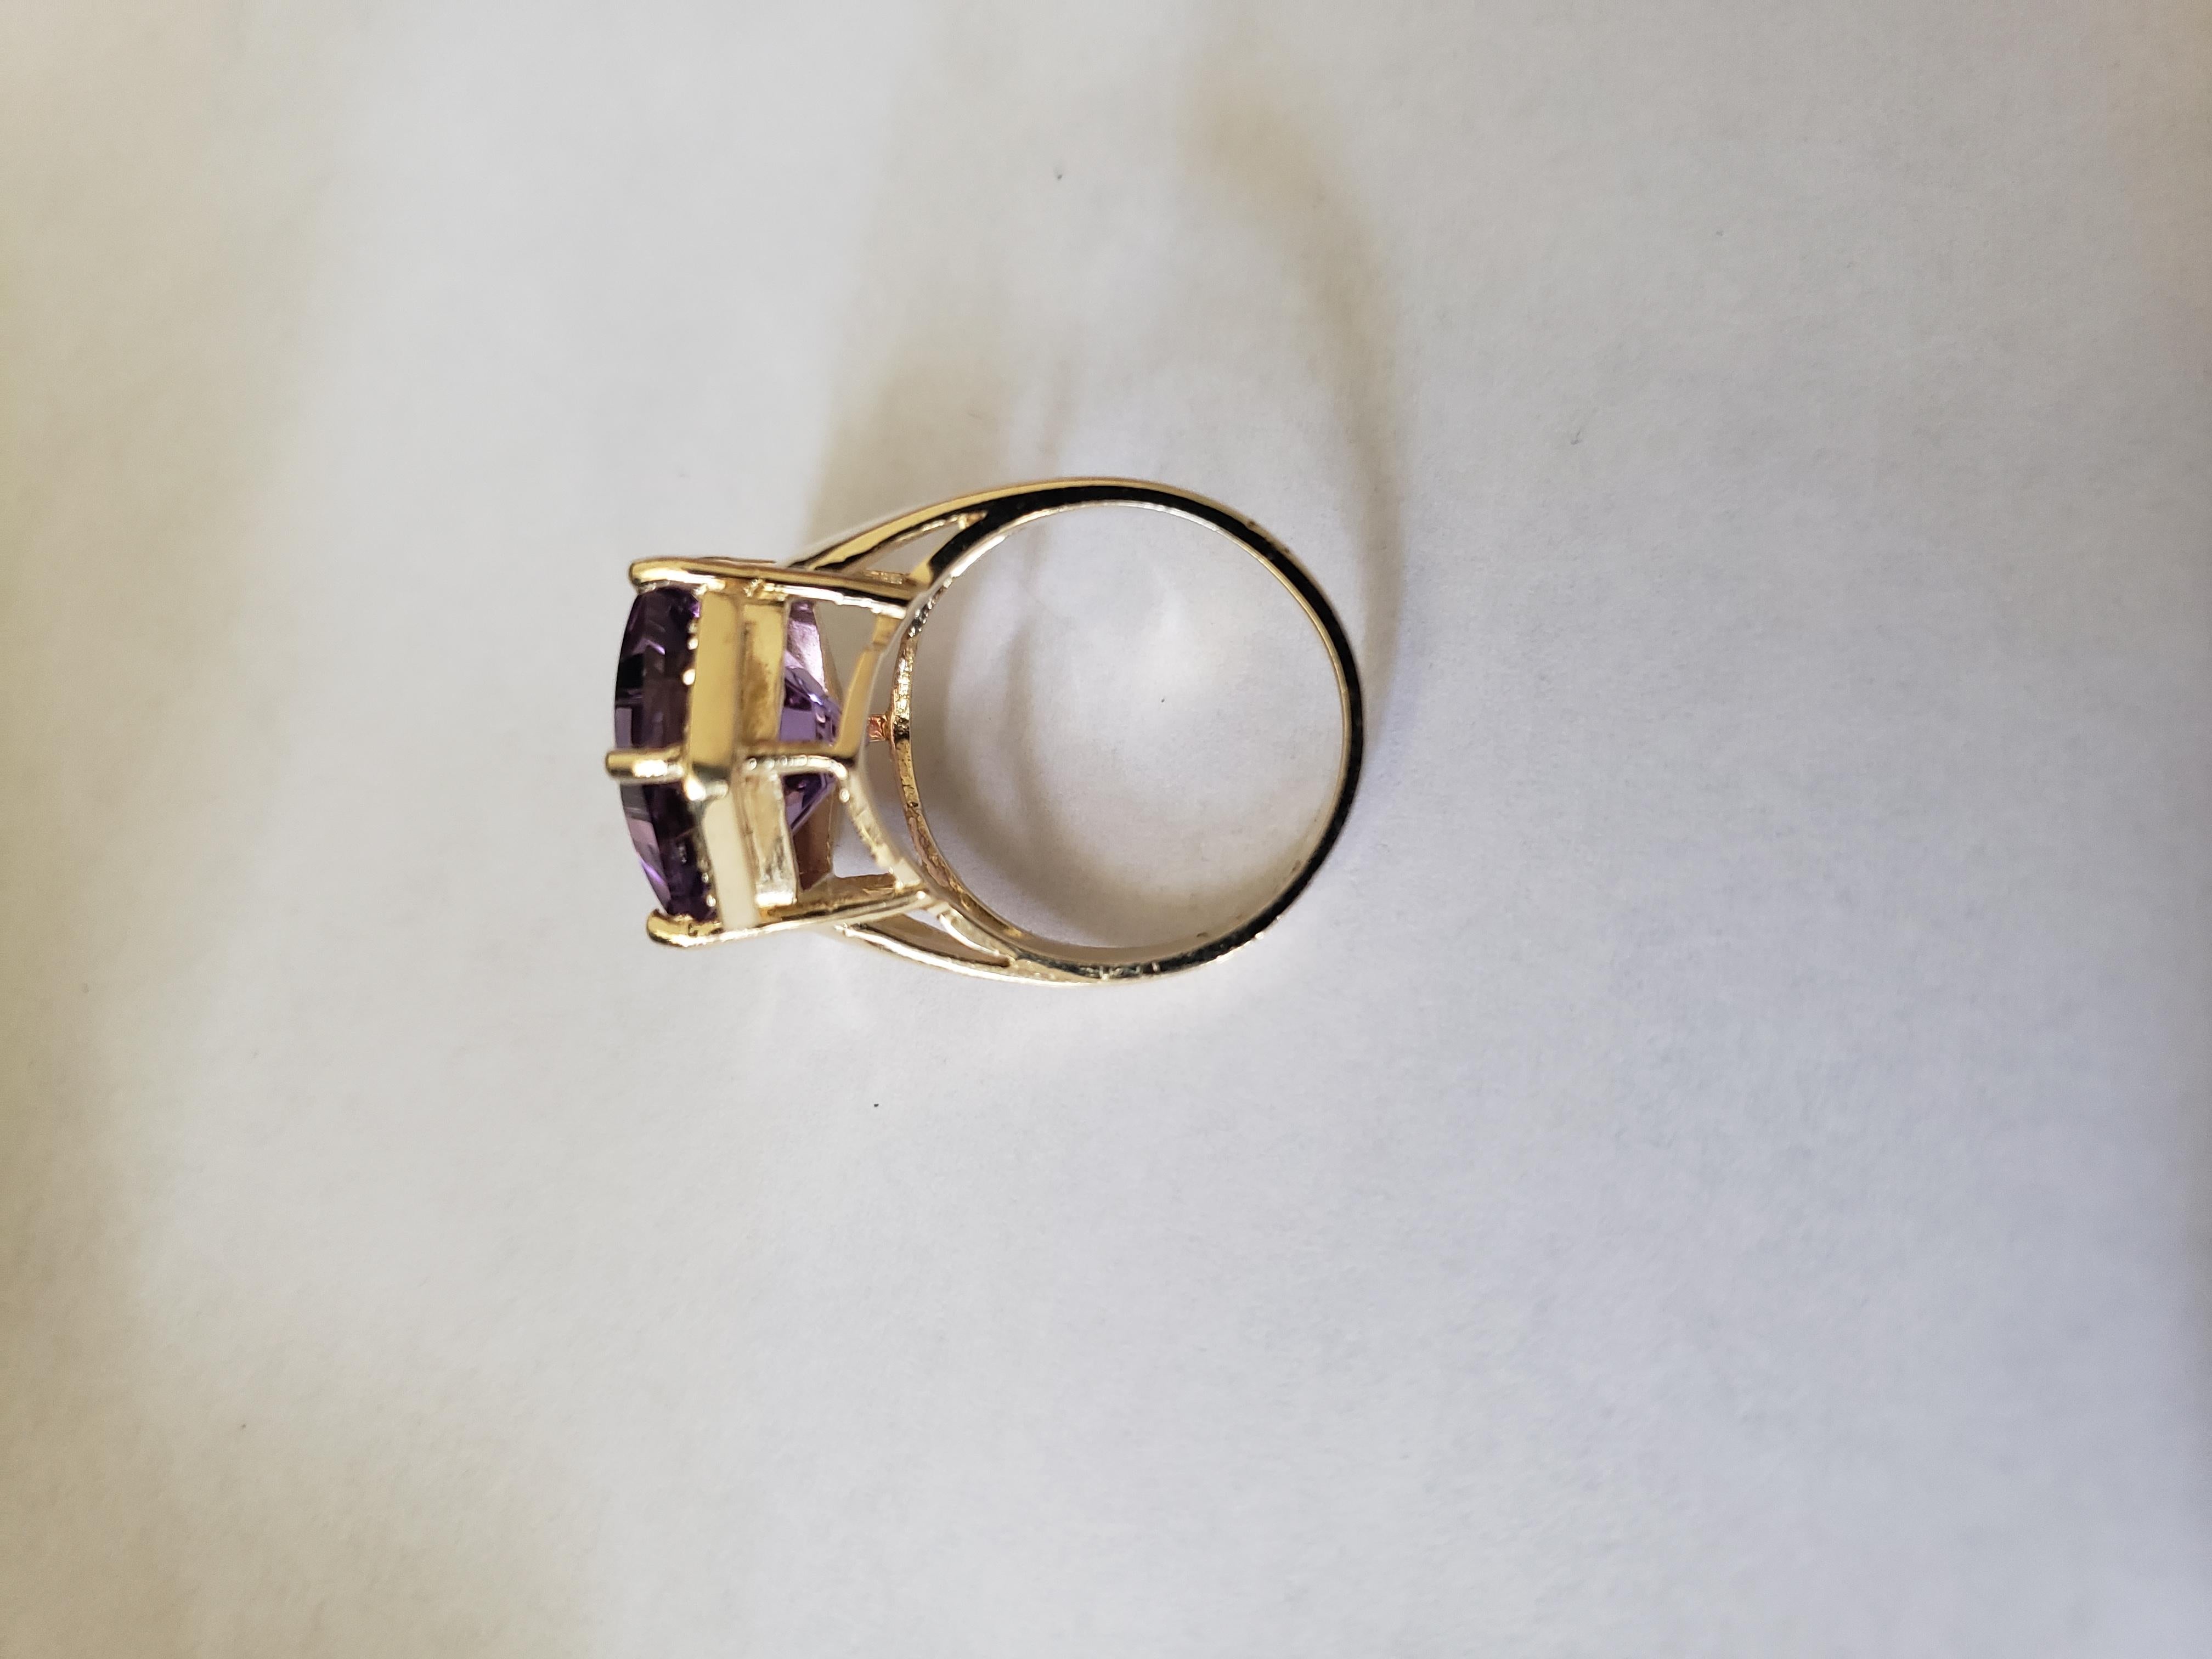 NEW 8 Ct. Natural Amethyst Ring with Diamonds in 14k Solid Yellow Gold  For Sale 2